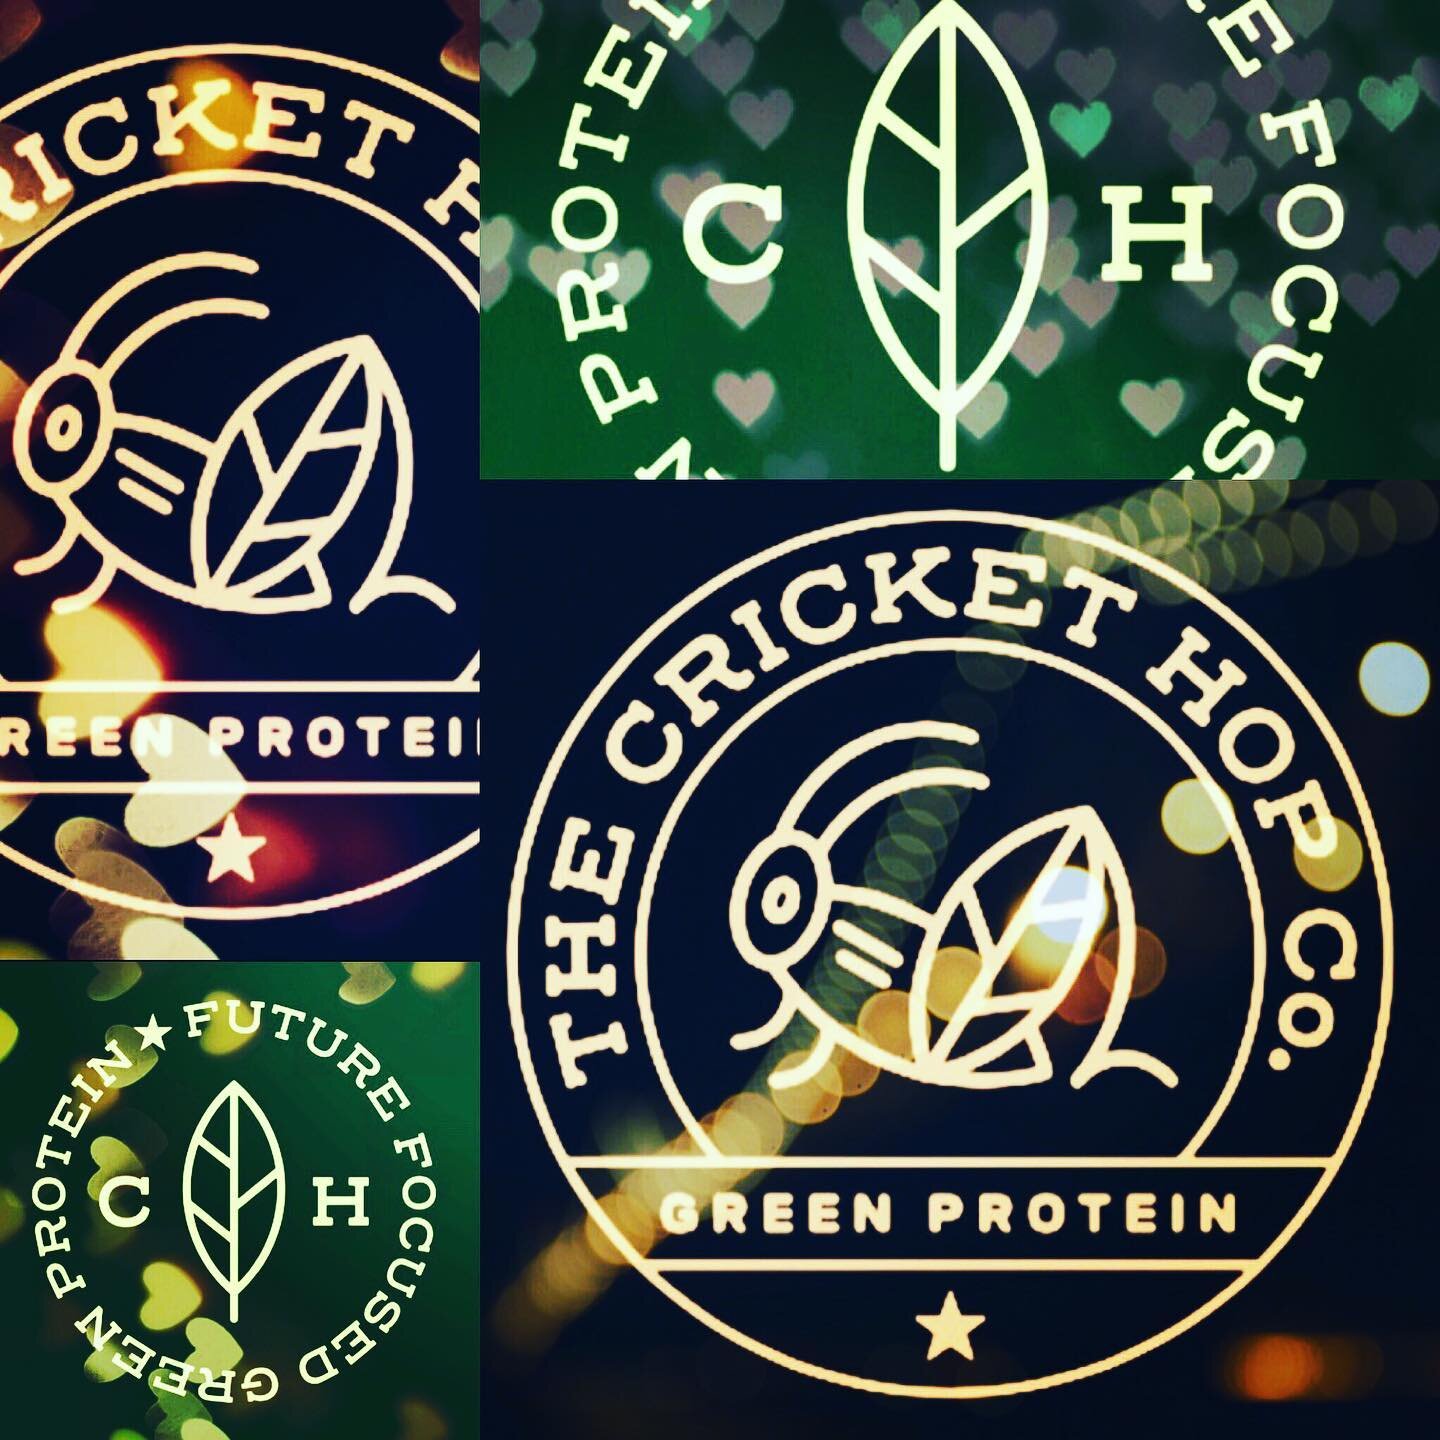 Cricket Hop is now back online and fully stocked. Check out our summer offers from Thursday. @ www.crickethop.com #crickethop #crickethopfoods #cricketprotein #cricketflourprotein #nutrition #lifestyle #sustanibility #green #greenprotein